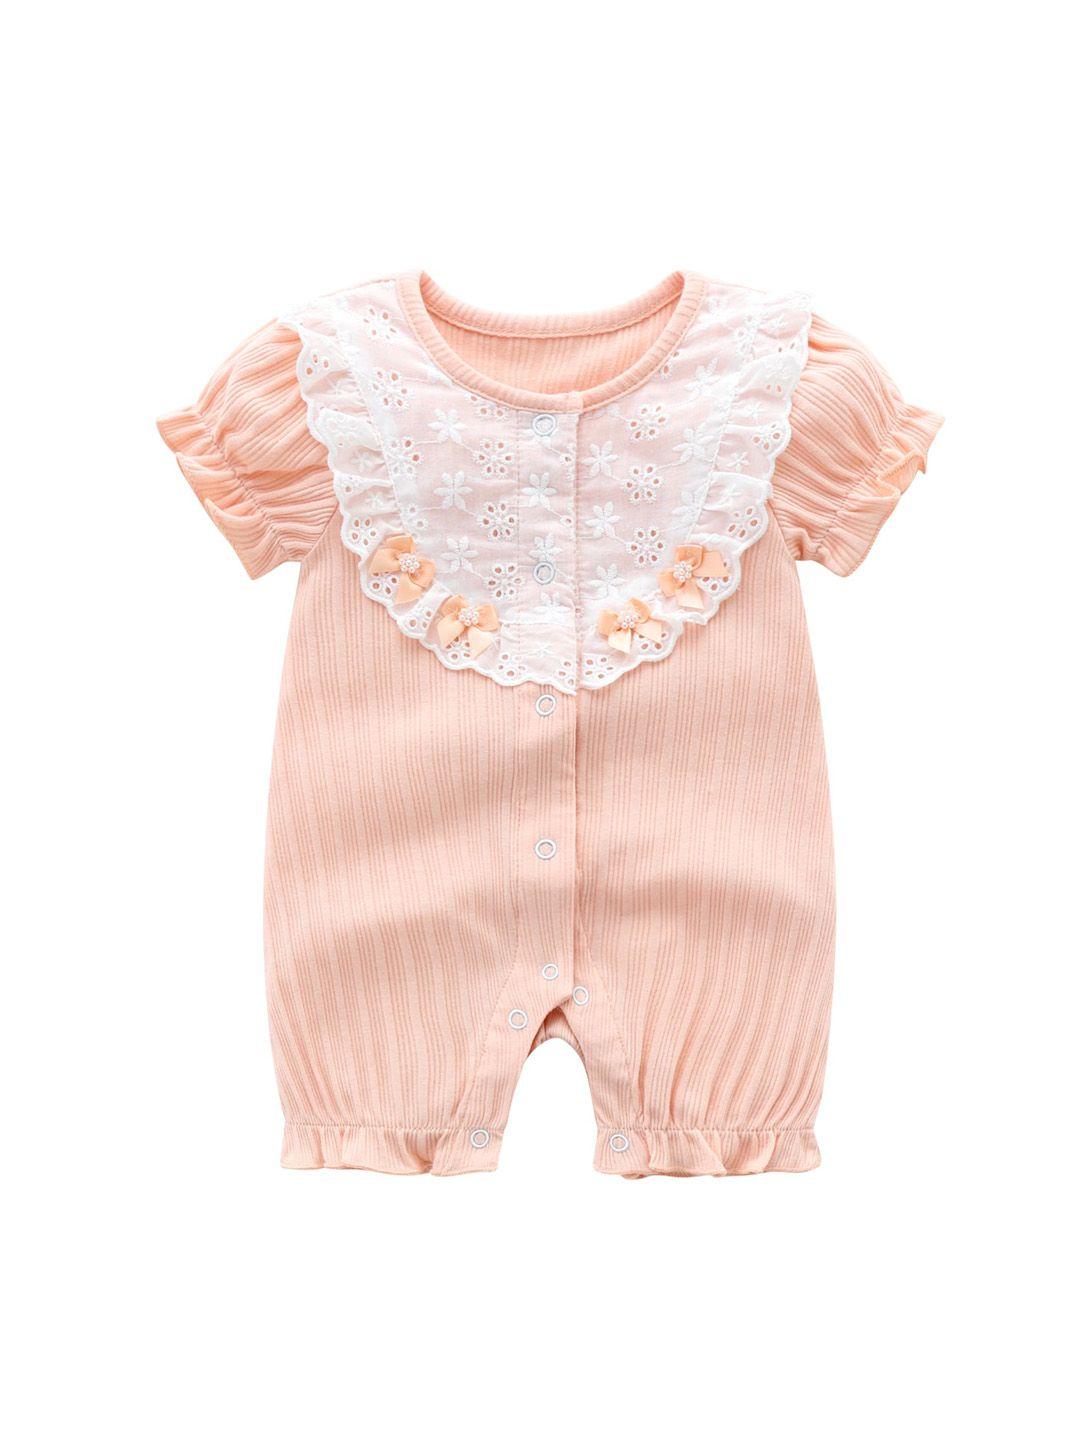 stylecast infant girls pink striped cotton rompers